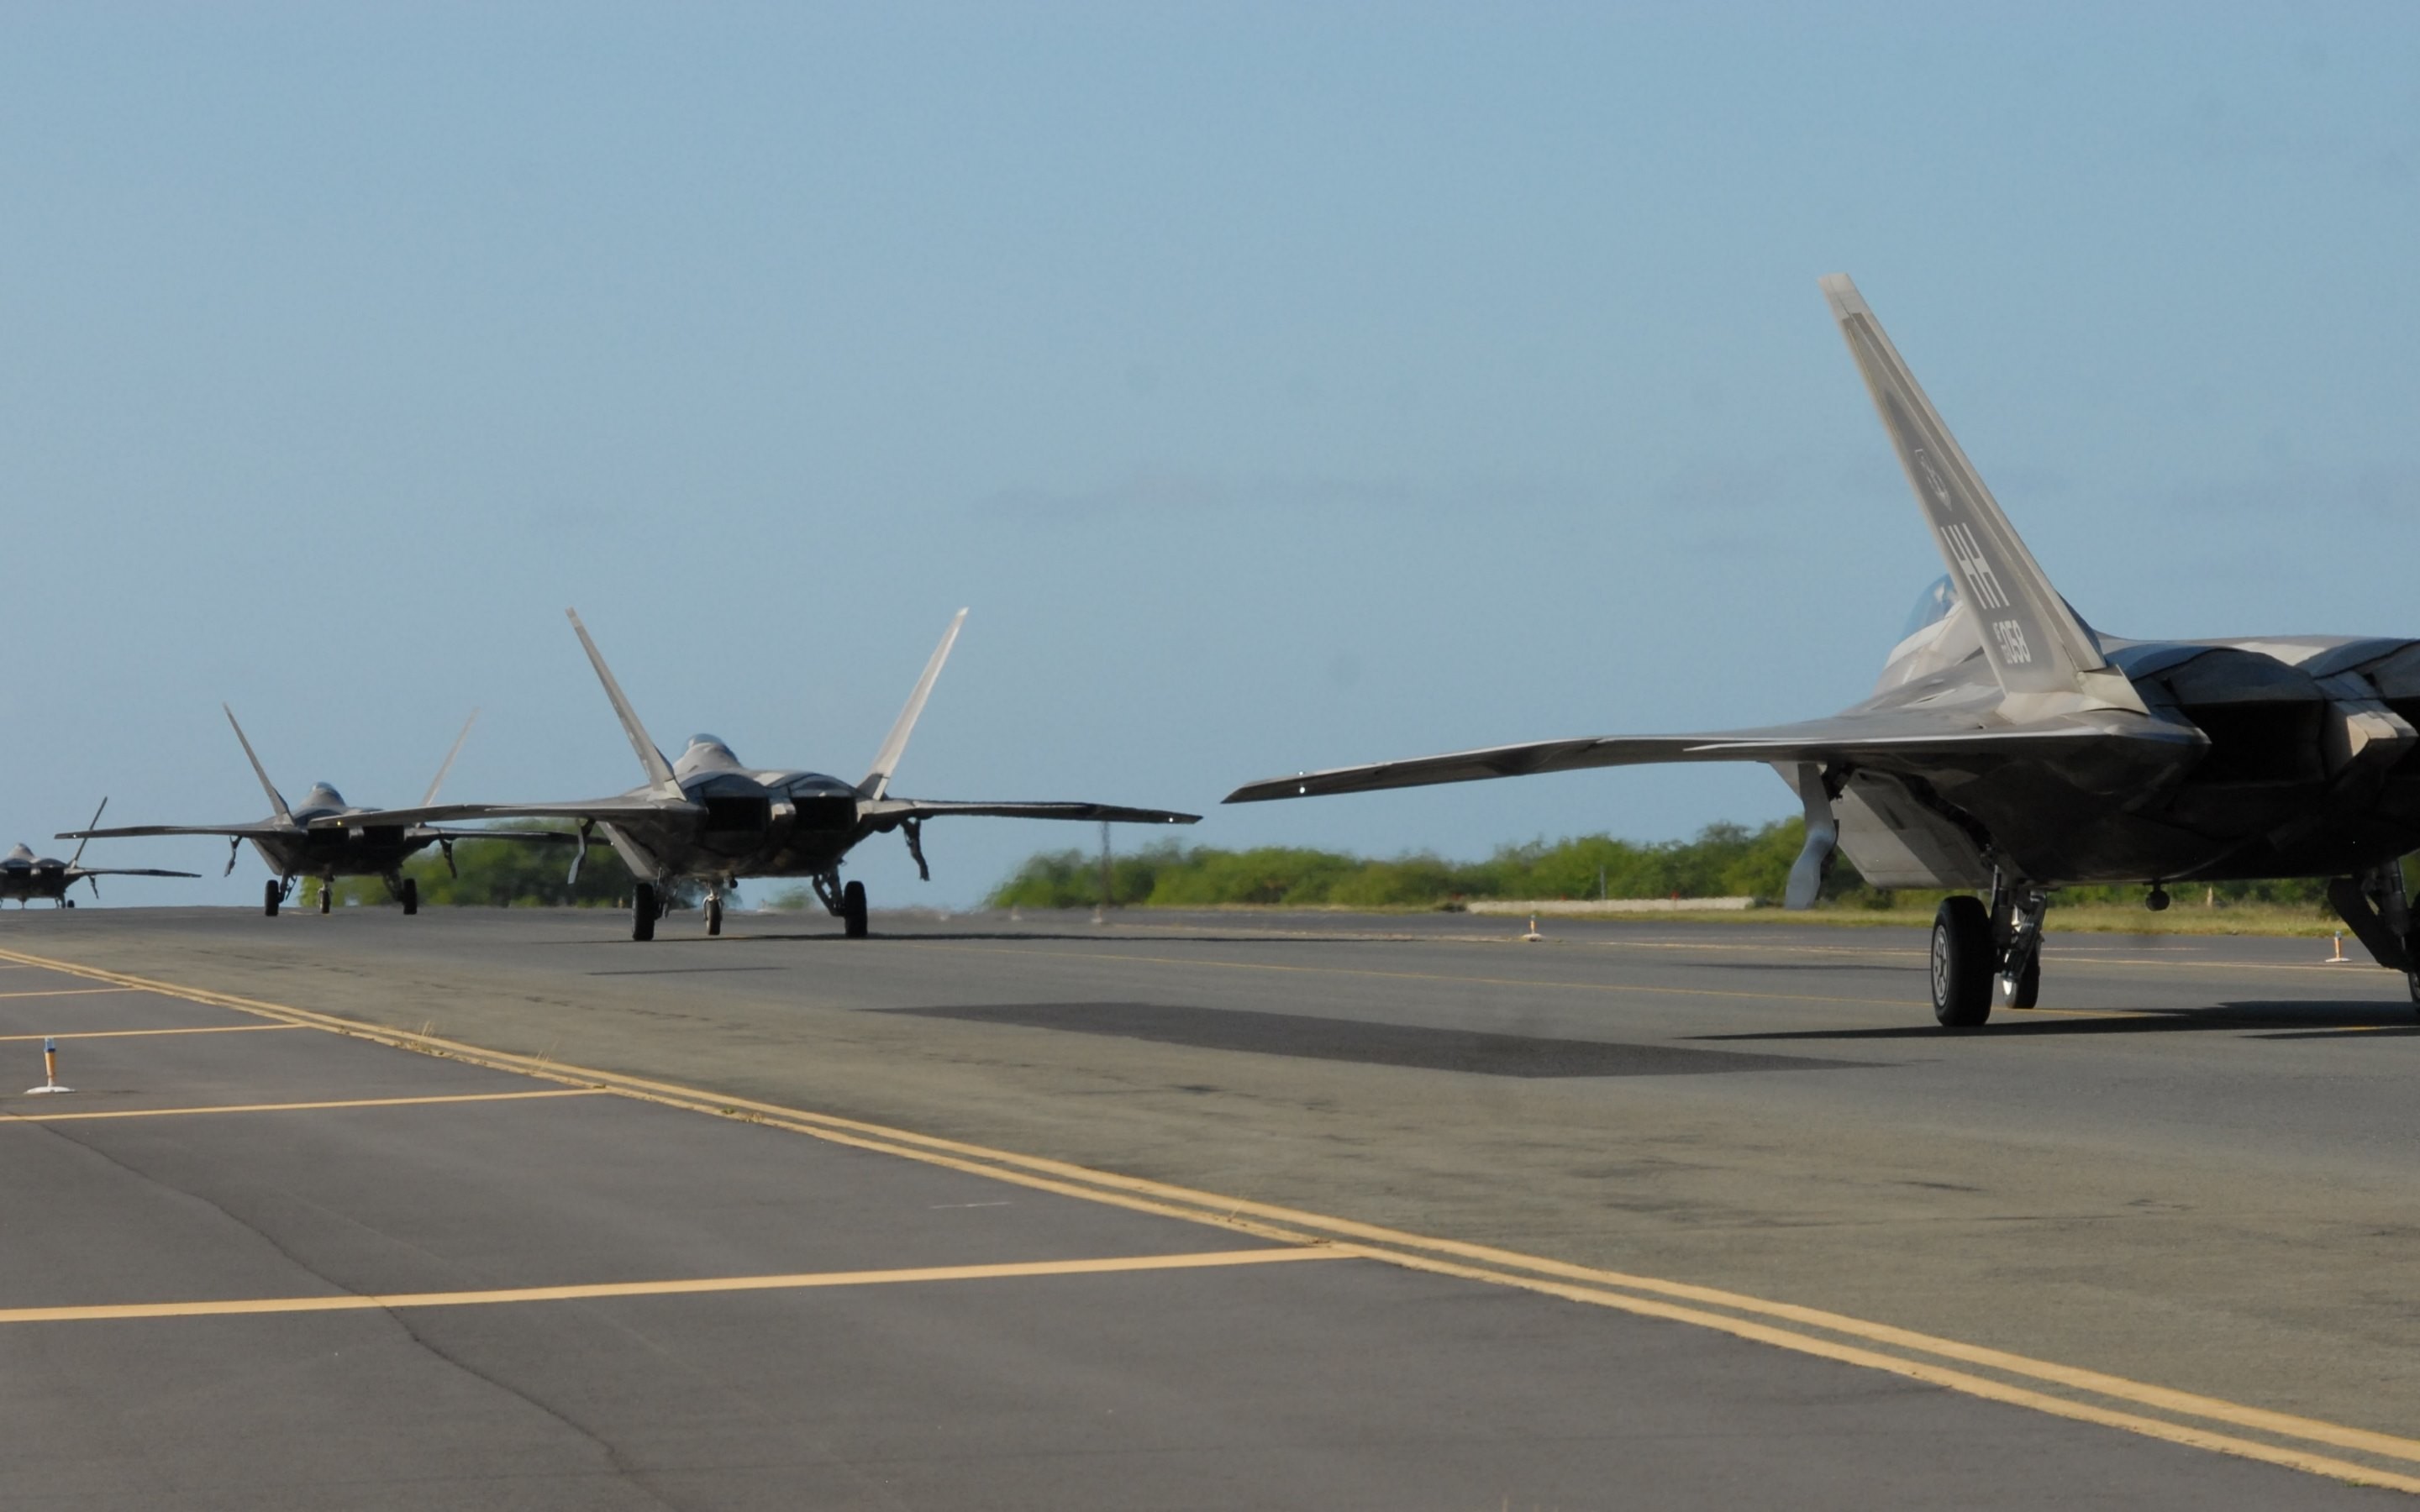 2880x1800 Four F22 Raptors are on the runway in this new picture Â· Download the  wallpaper for apply in 4K, HD and wide screens from listed links under CC  license by ...